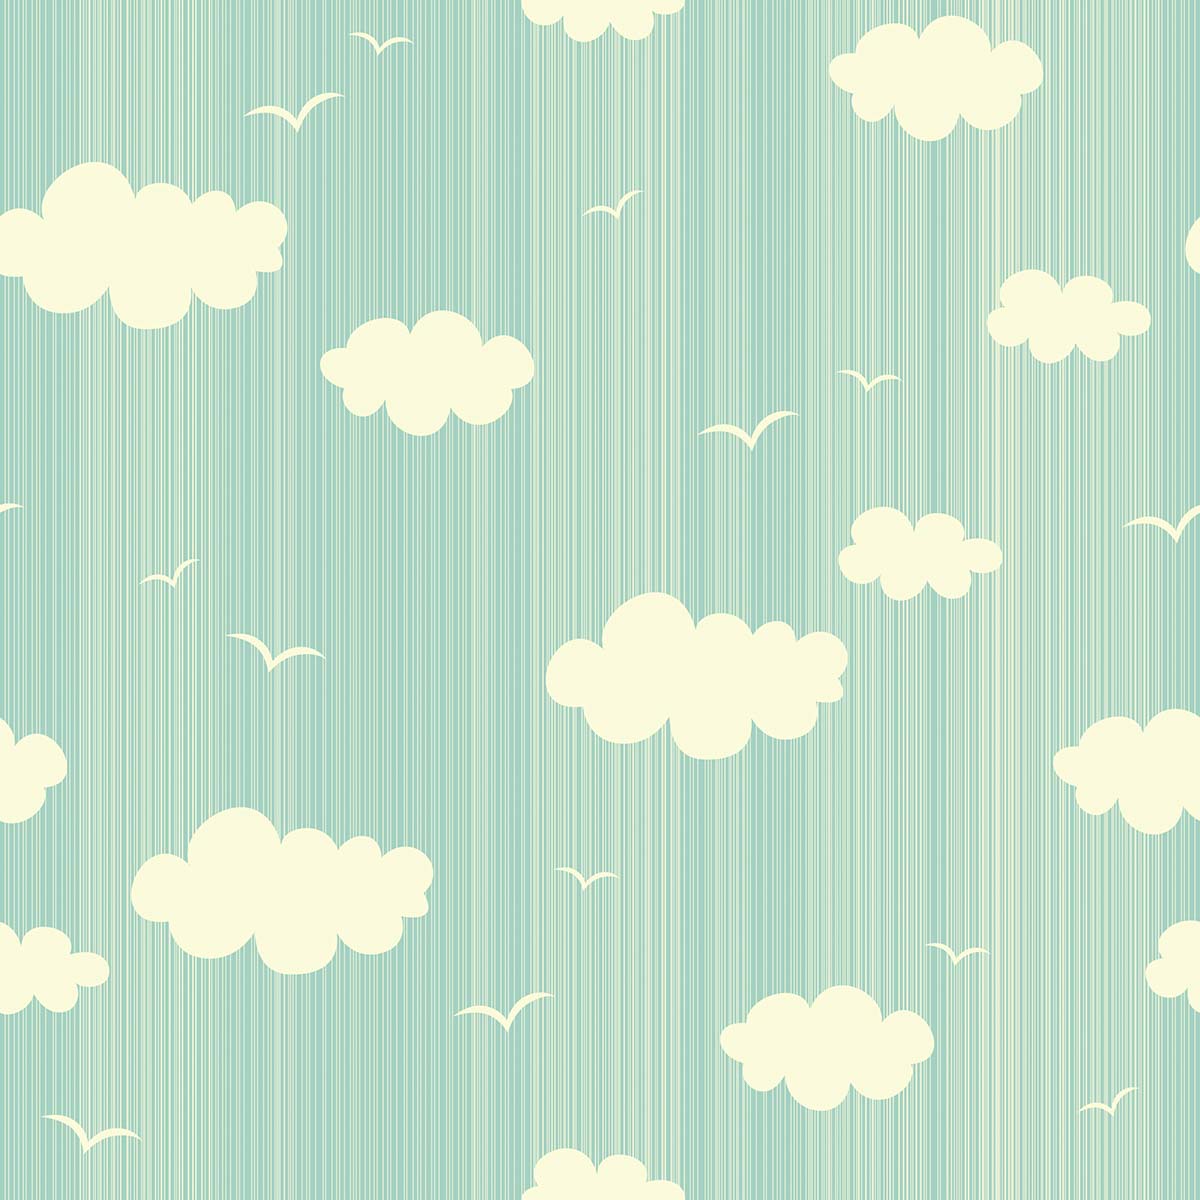 A blue and white striped background with white clouds and birds